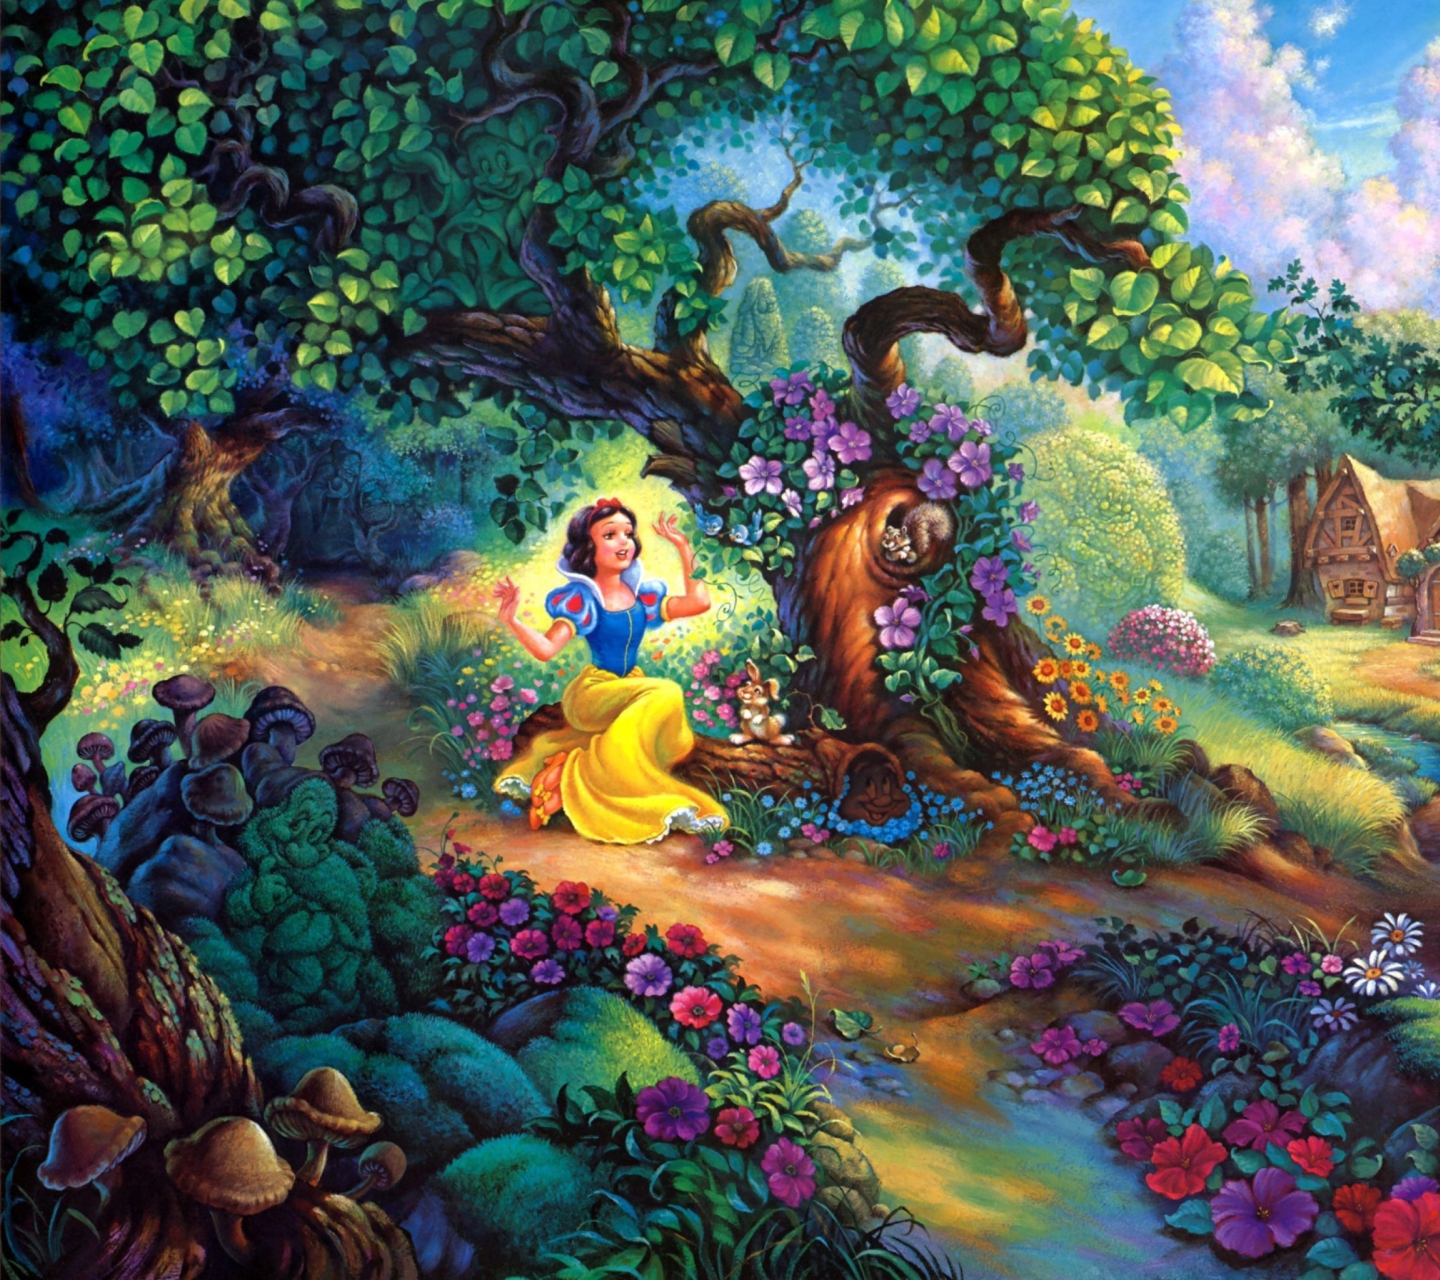 Snow White In Magical Forest wallpaper 1440x1280